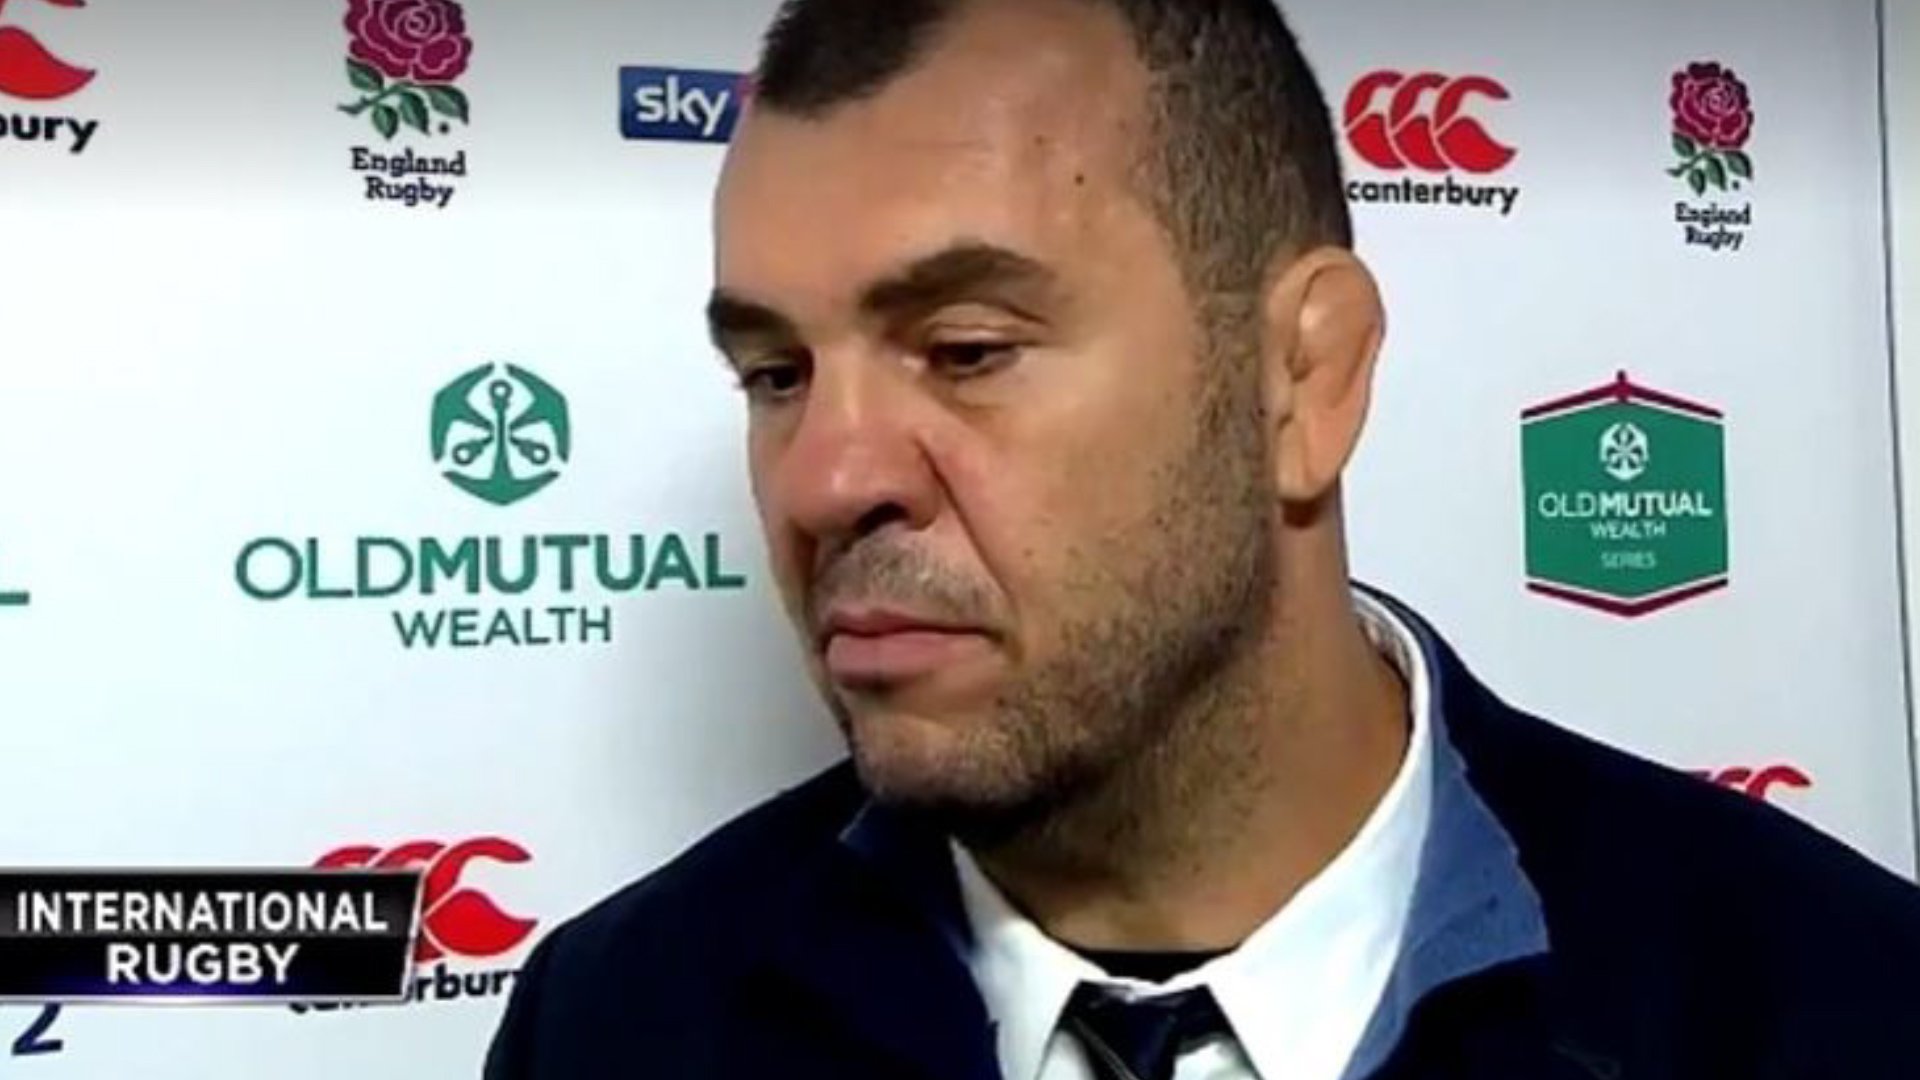 WATCH: Michael Cheika storms out of interview after being accused of calling the ref a 'f**cking cheat'